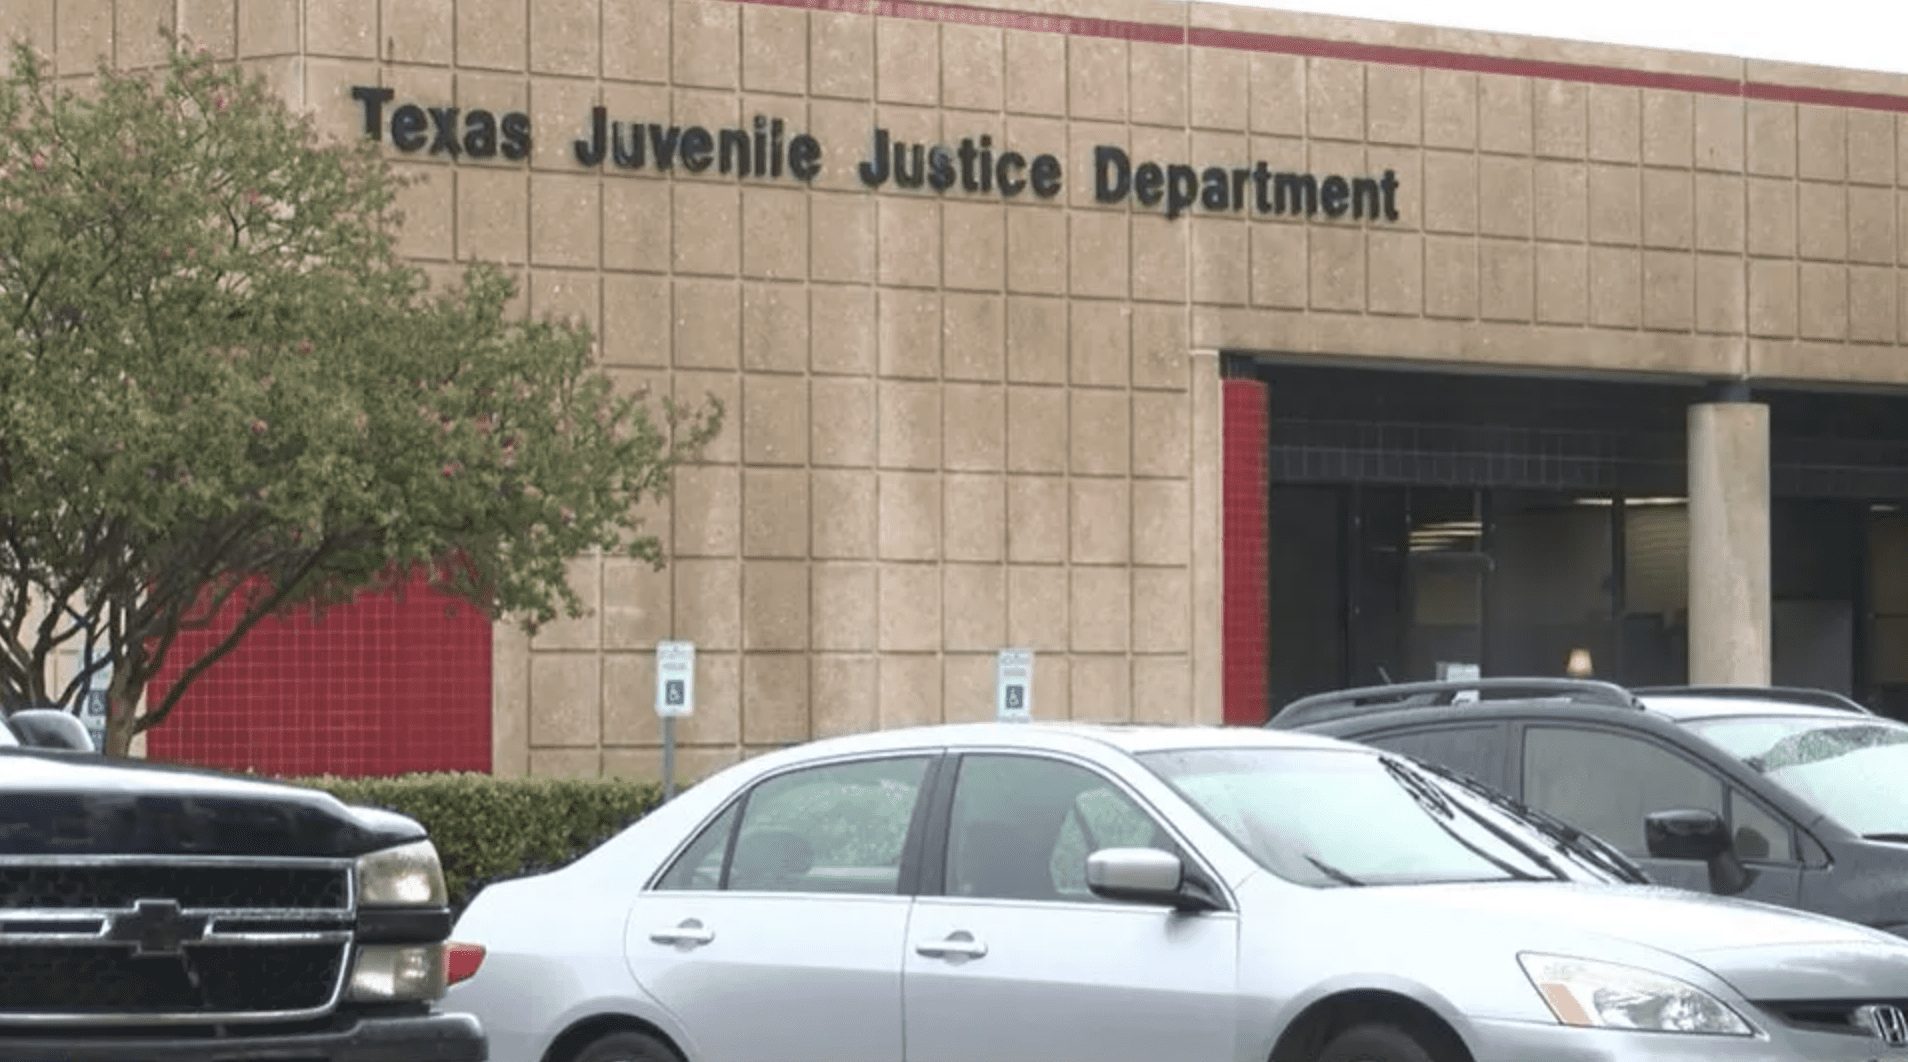 Texas Juvenile Detention Facilities Experiencing Staffing Shortages